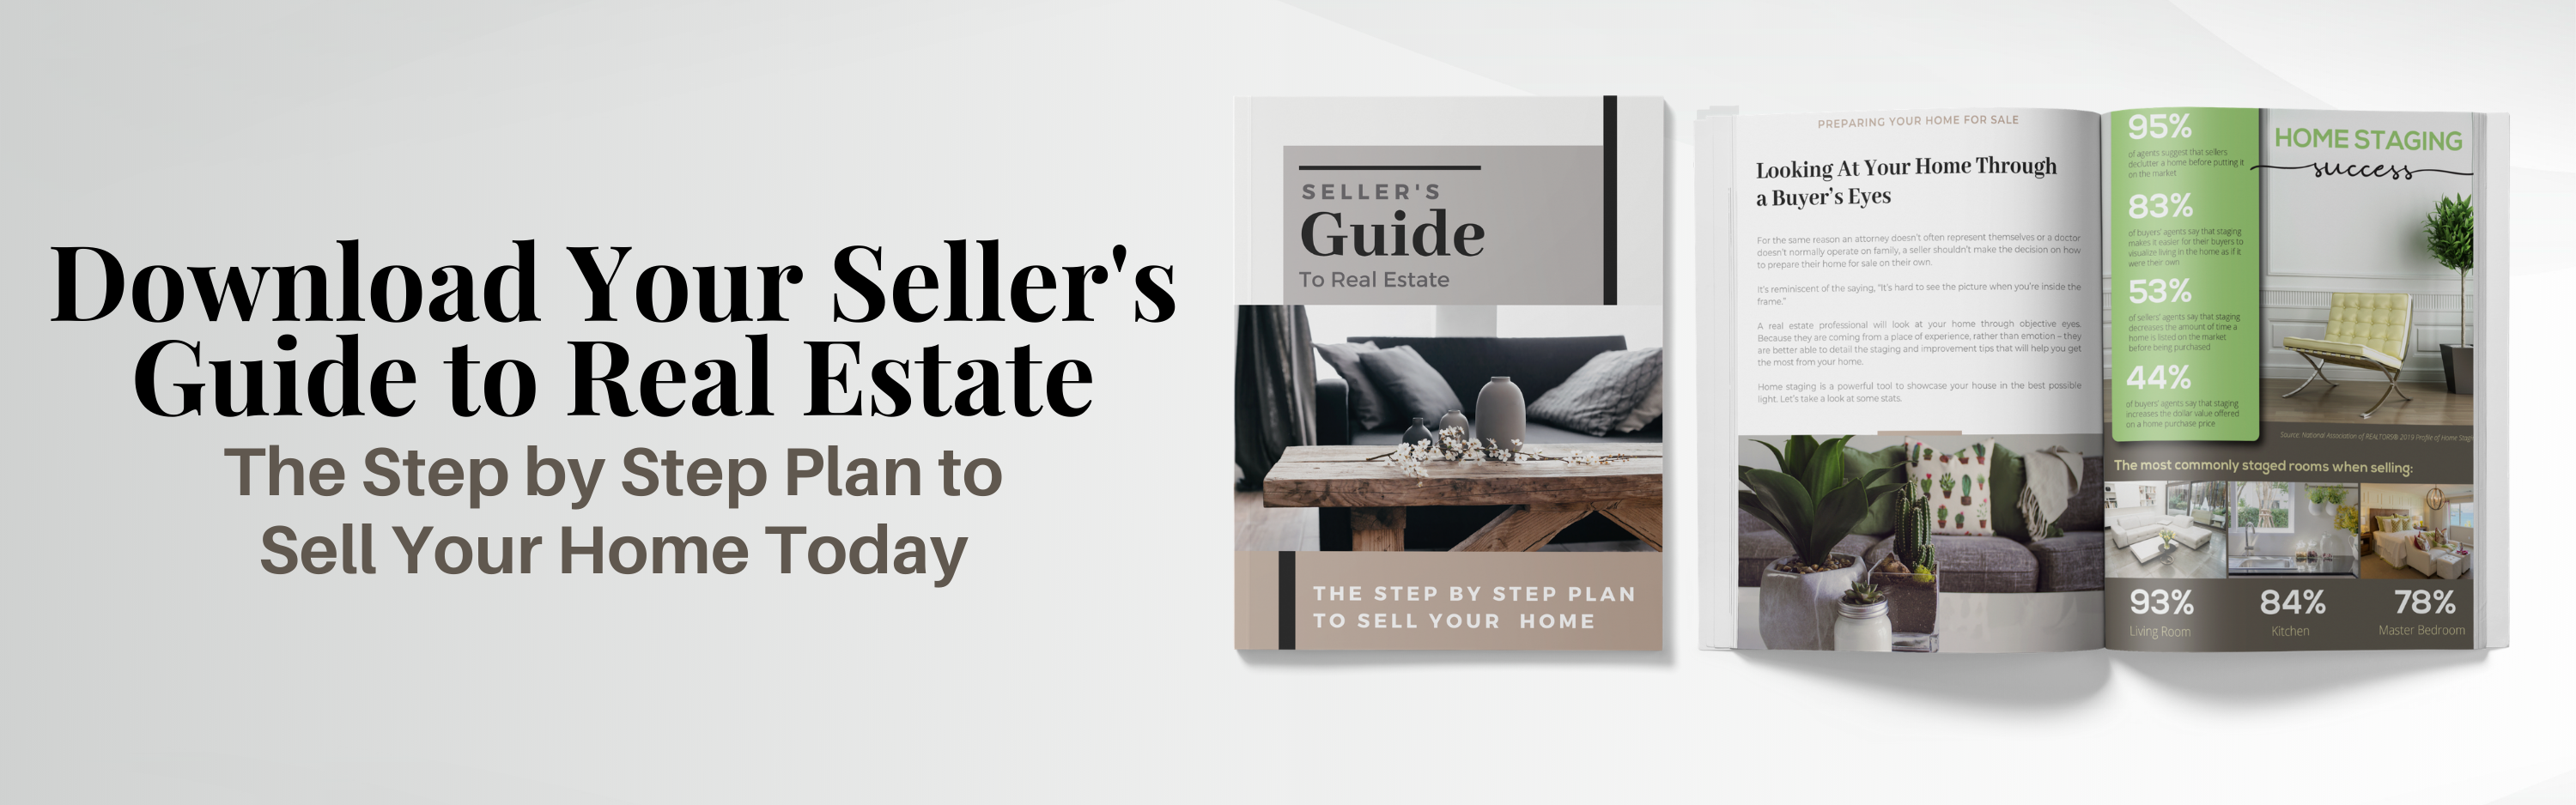 Seller's Guide to Real Estate